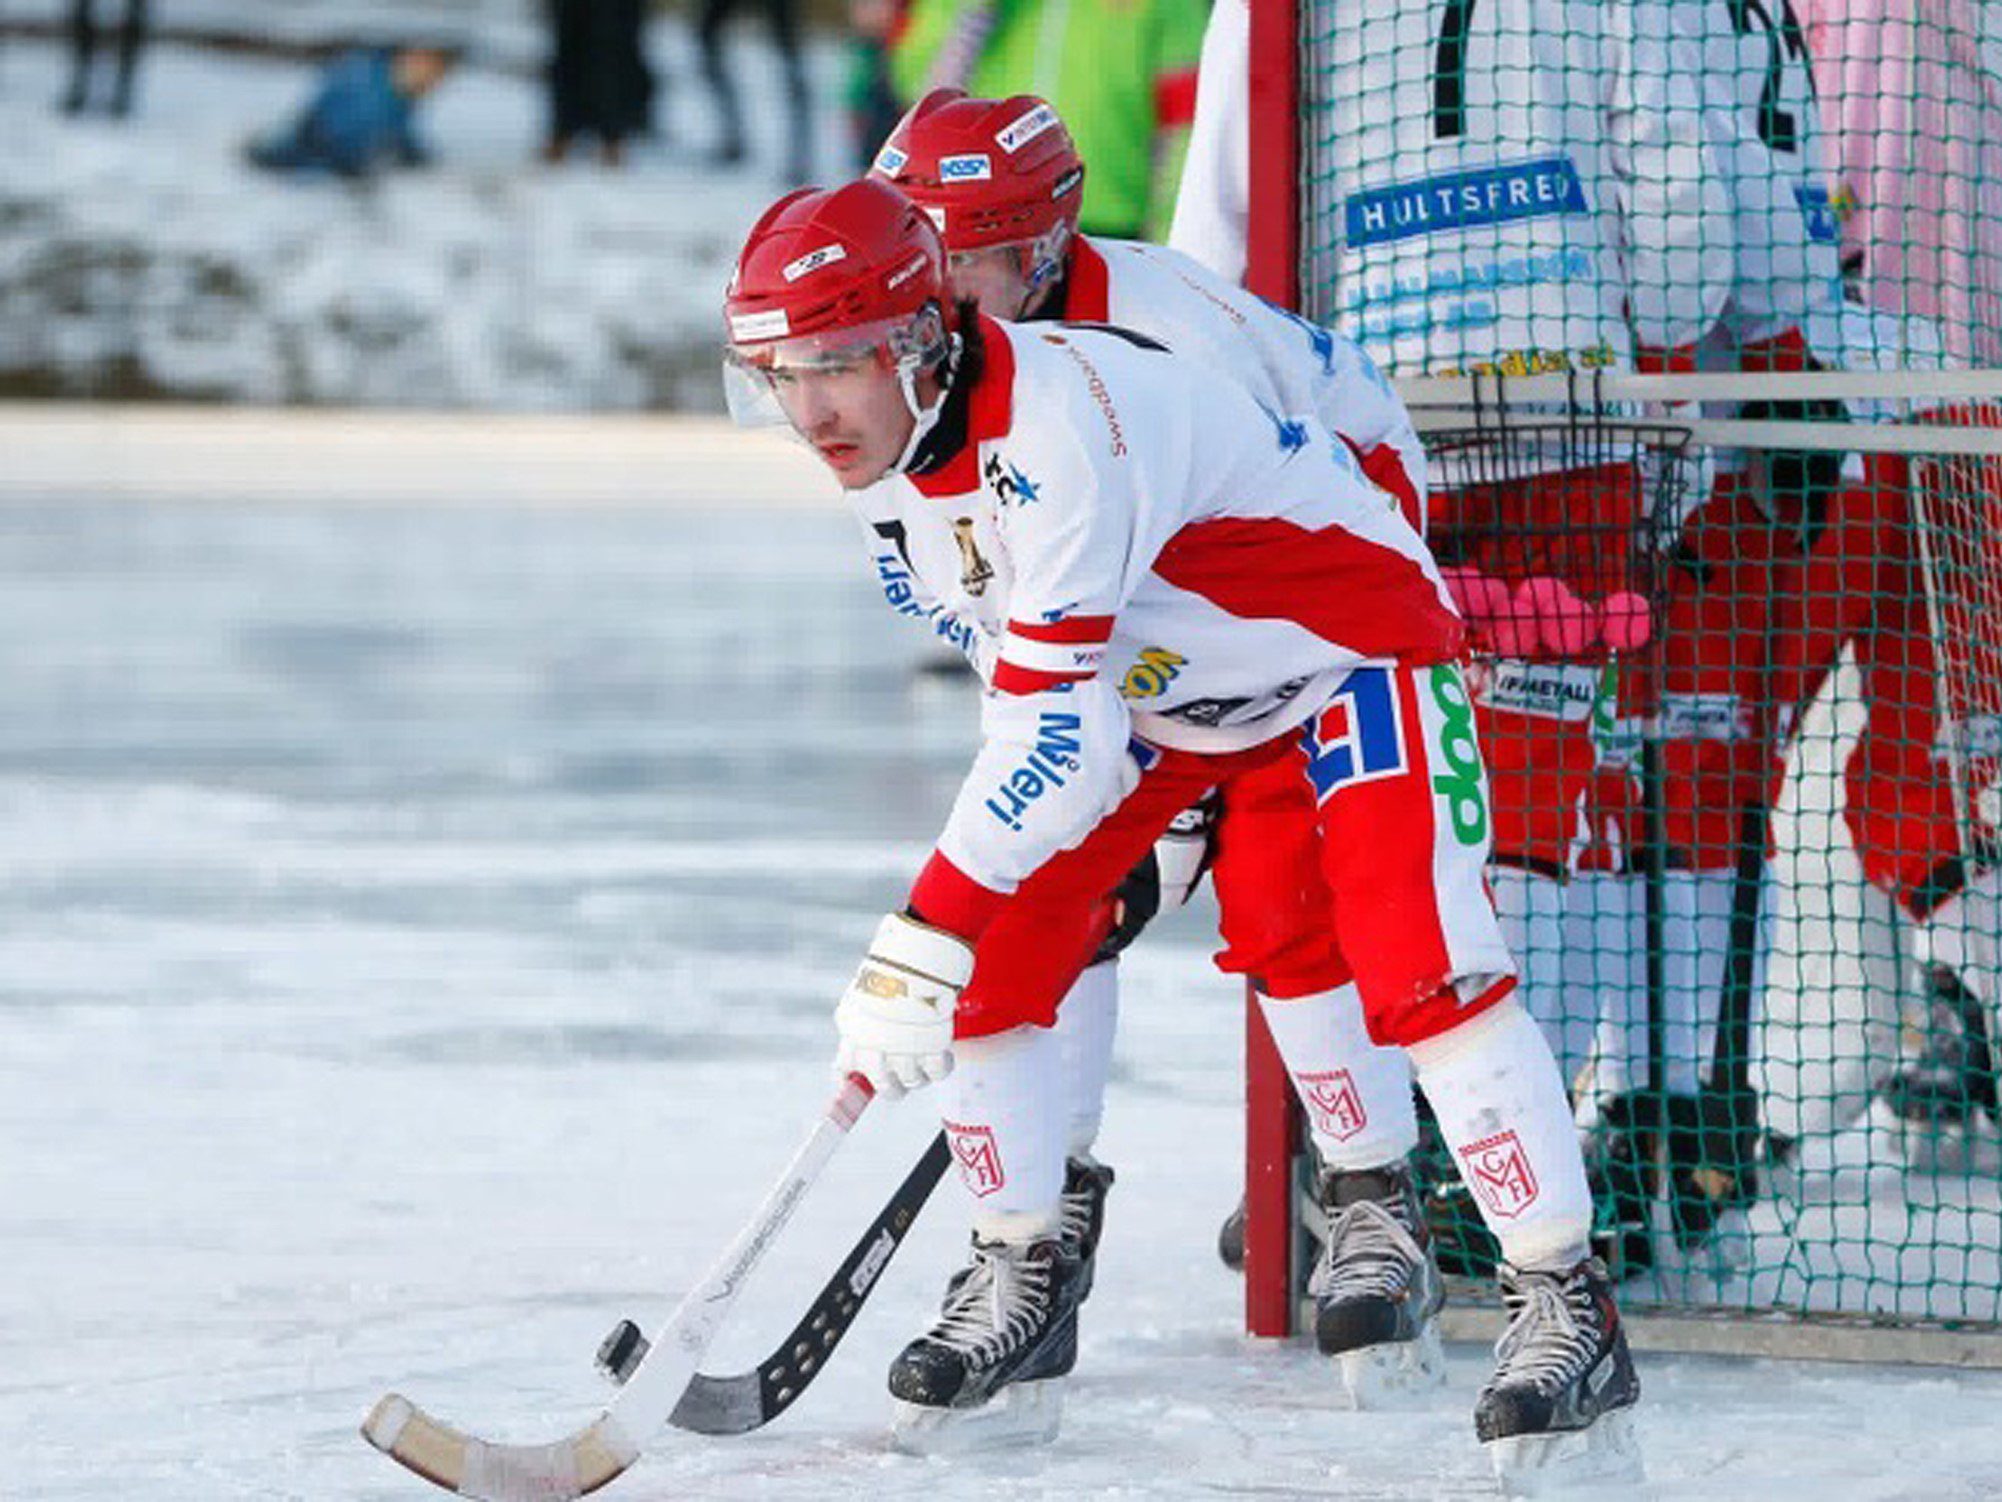 Two bandy players on ice